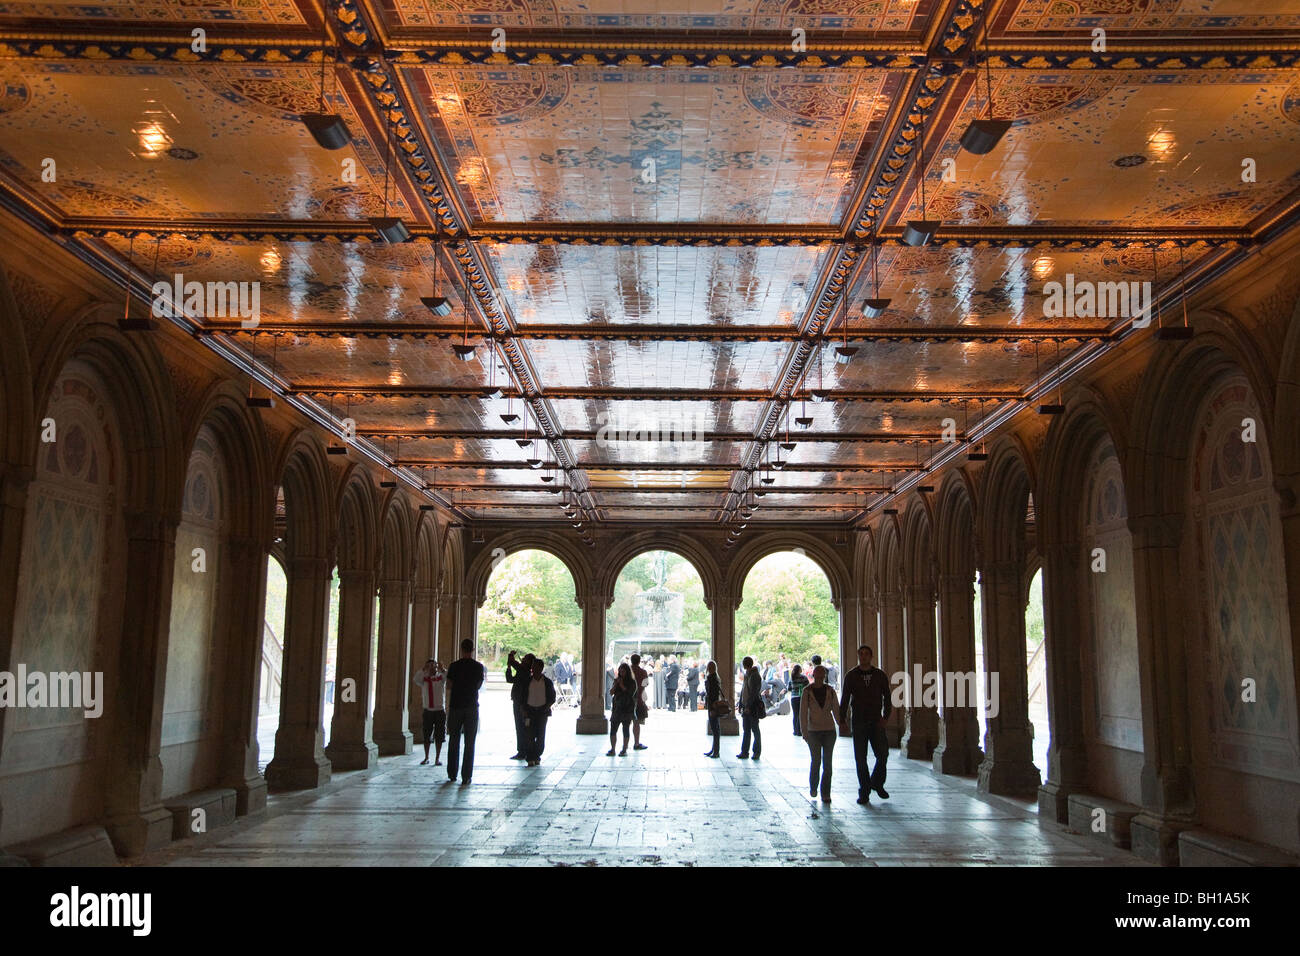 View of the Minton Tiles at Bethesda Terrace Arcade in Central Park, New York City. Stock Photo